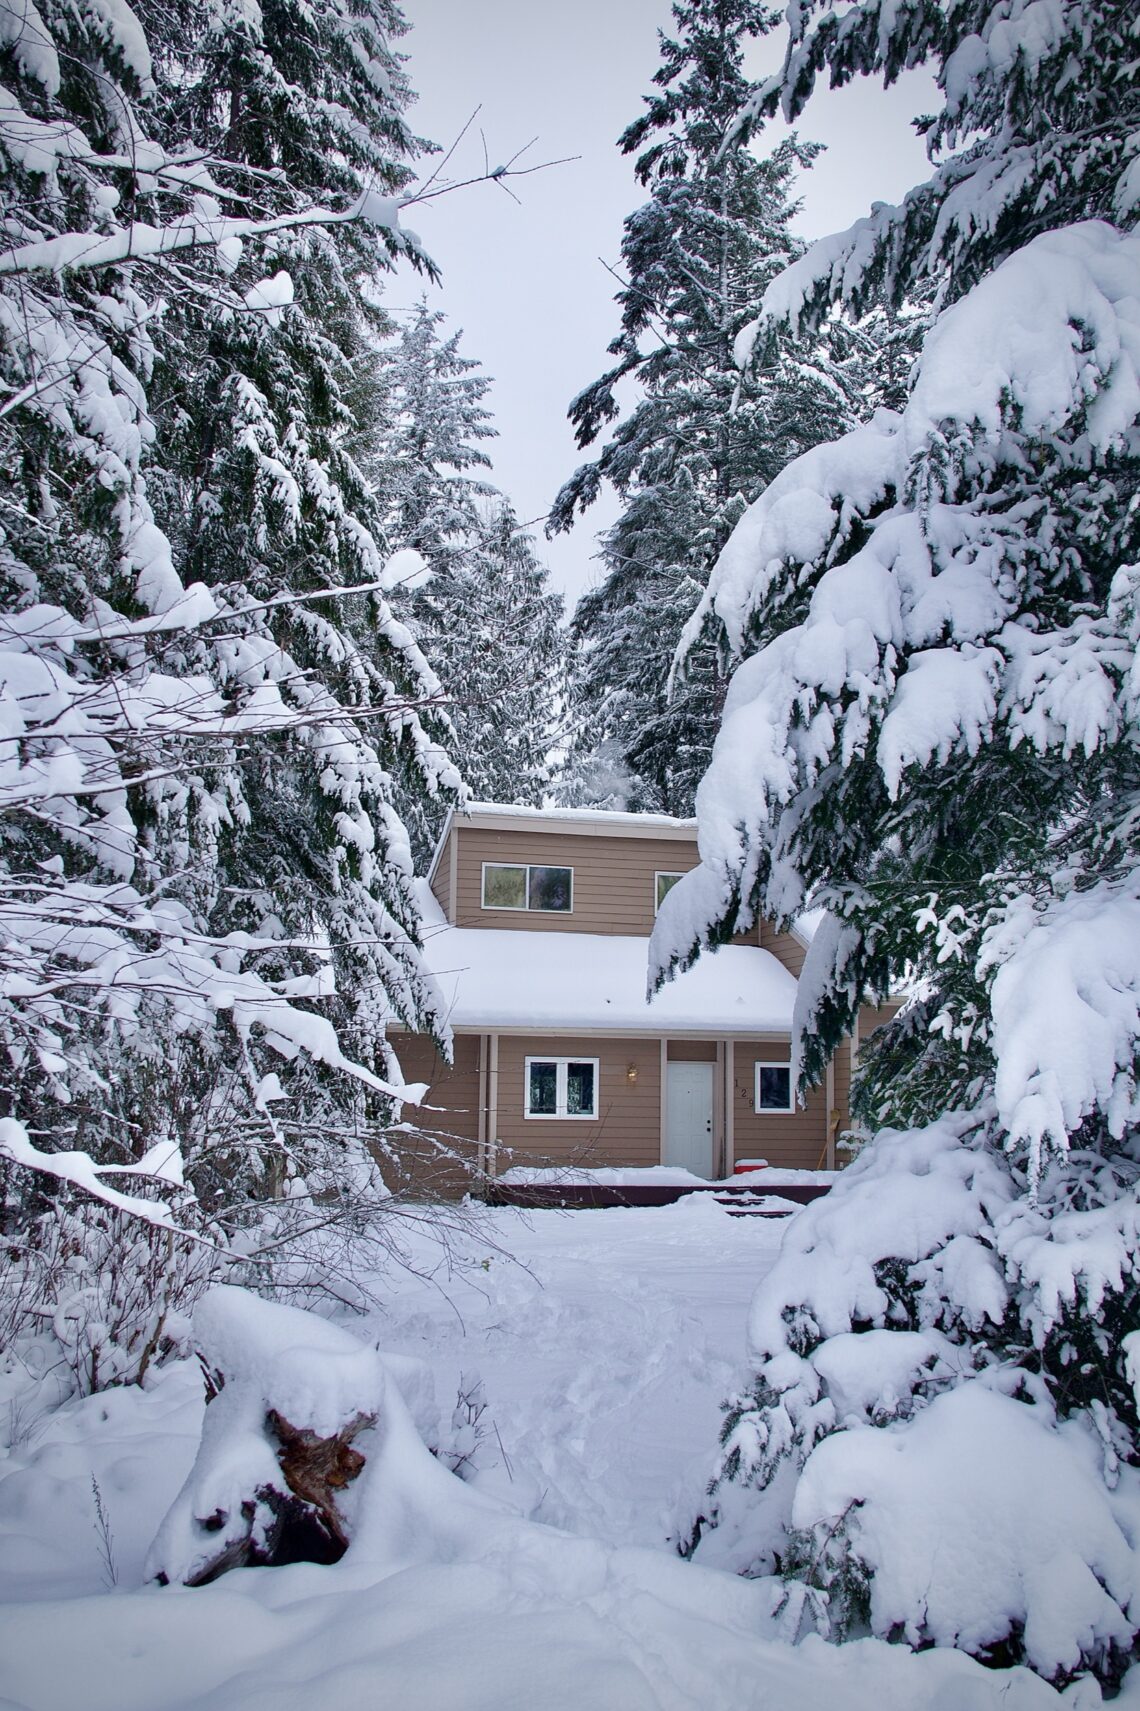 Front door of home in the snow with evergreen trees covered in snow nearby